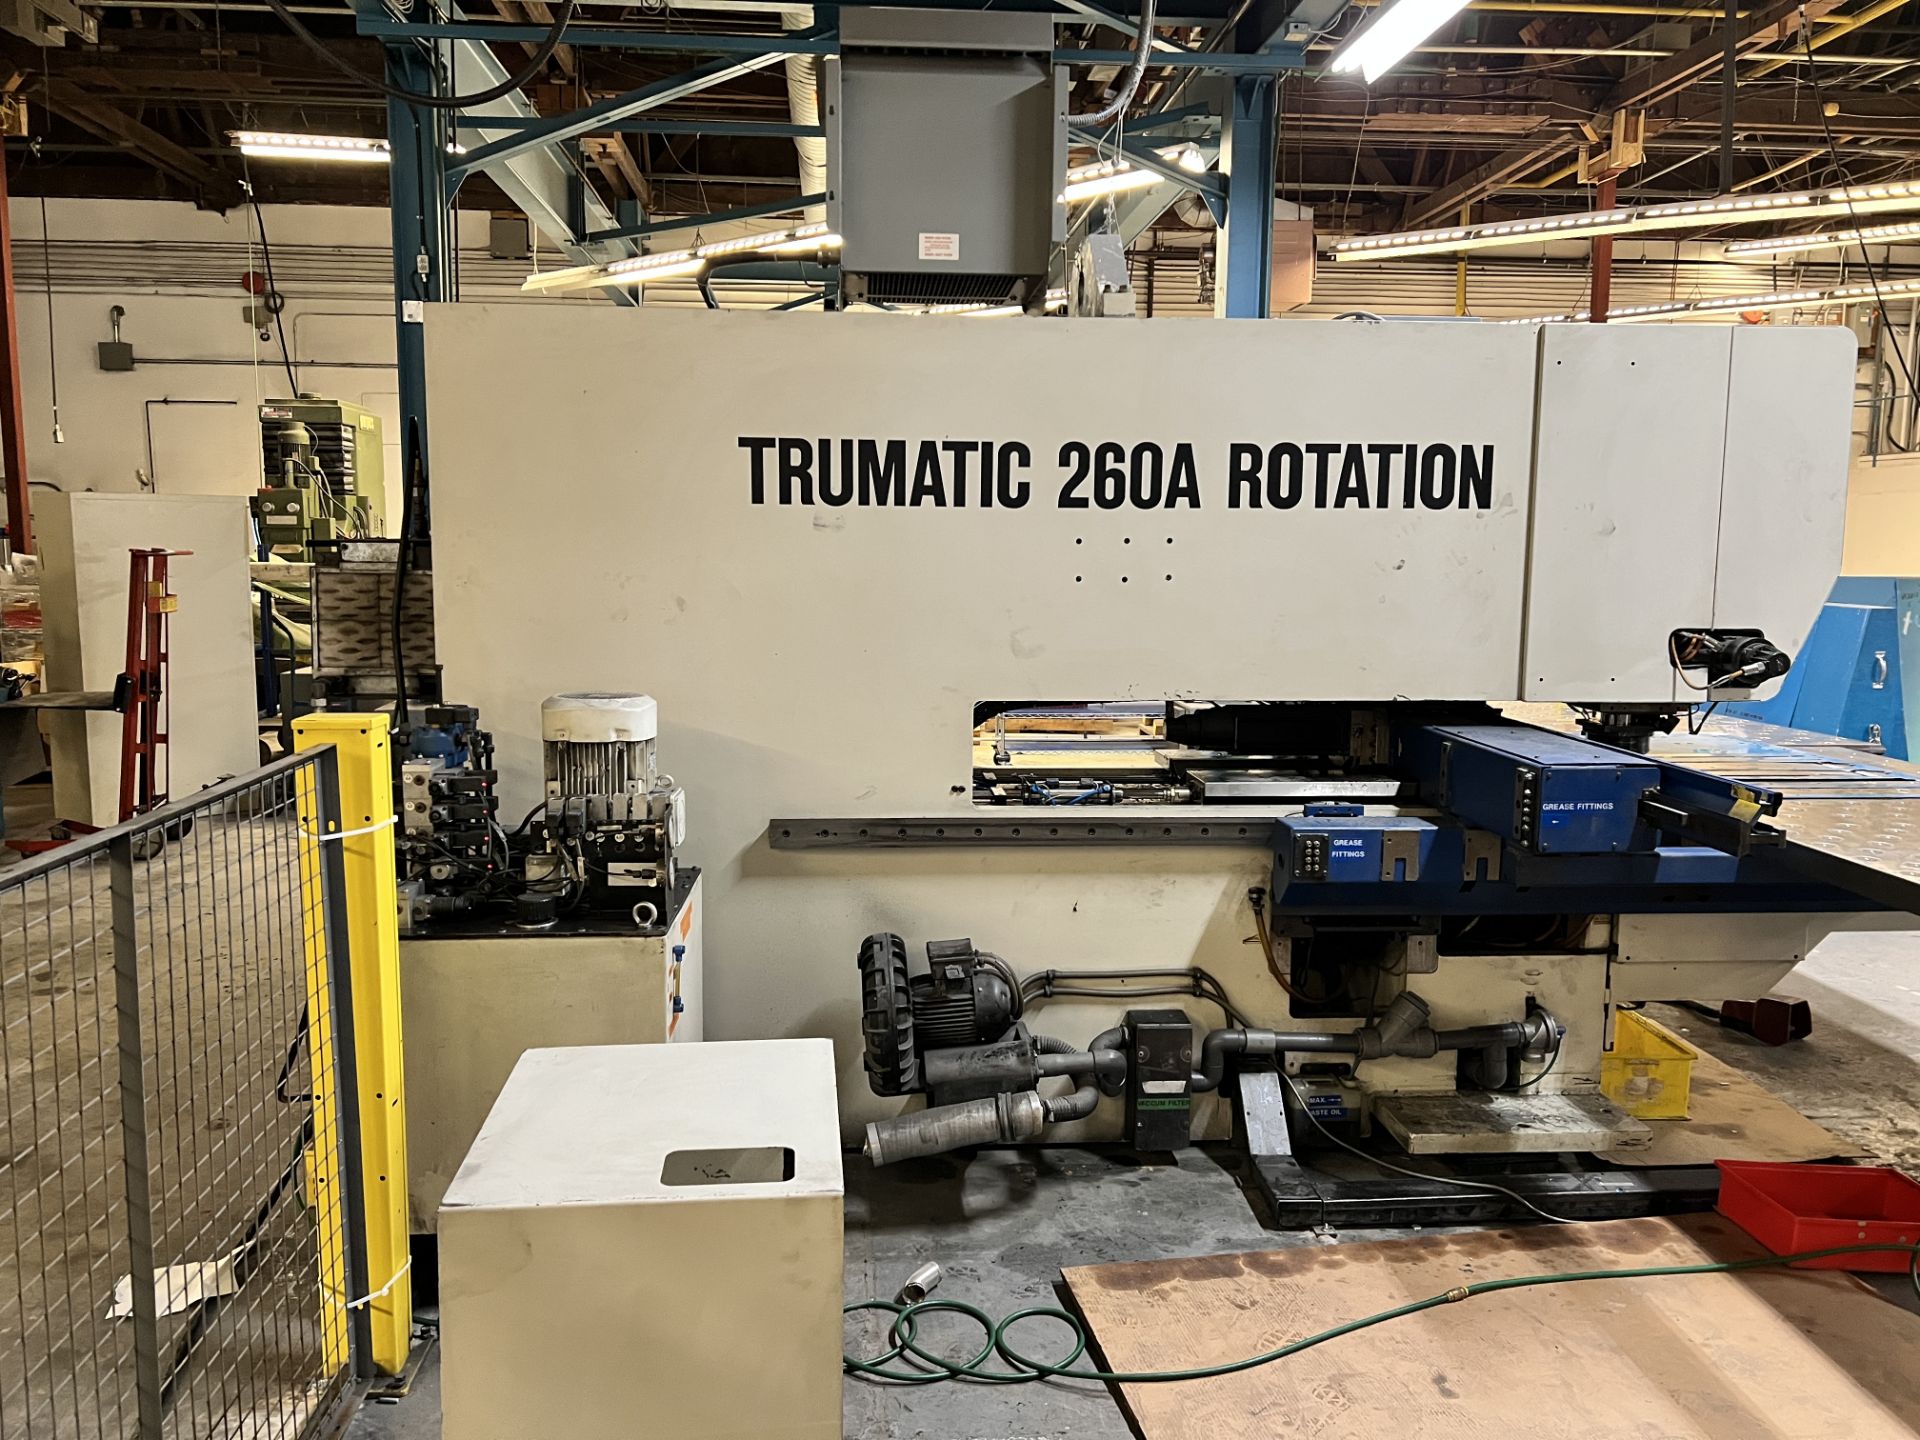 TRUMPF TRUMATIC 260A ROTATION TURRET PUNCHING MACHINE, 28 TONS MAX PUNCH, S/N 5108, 460V, - Image 6 of 6